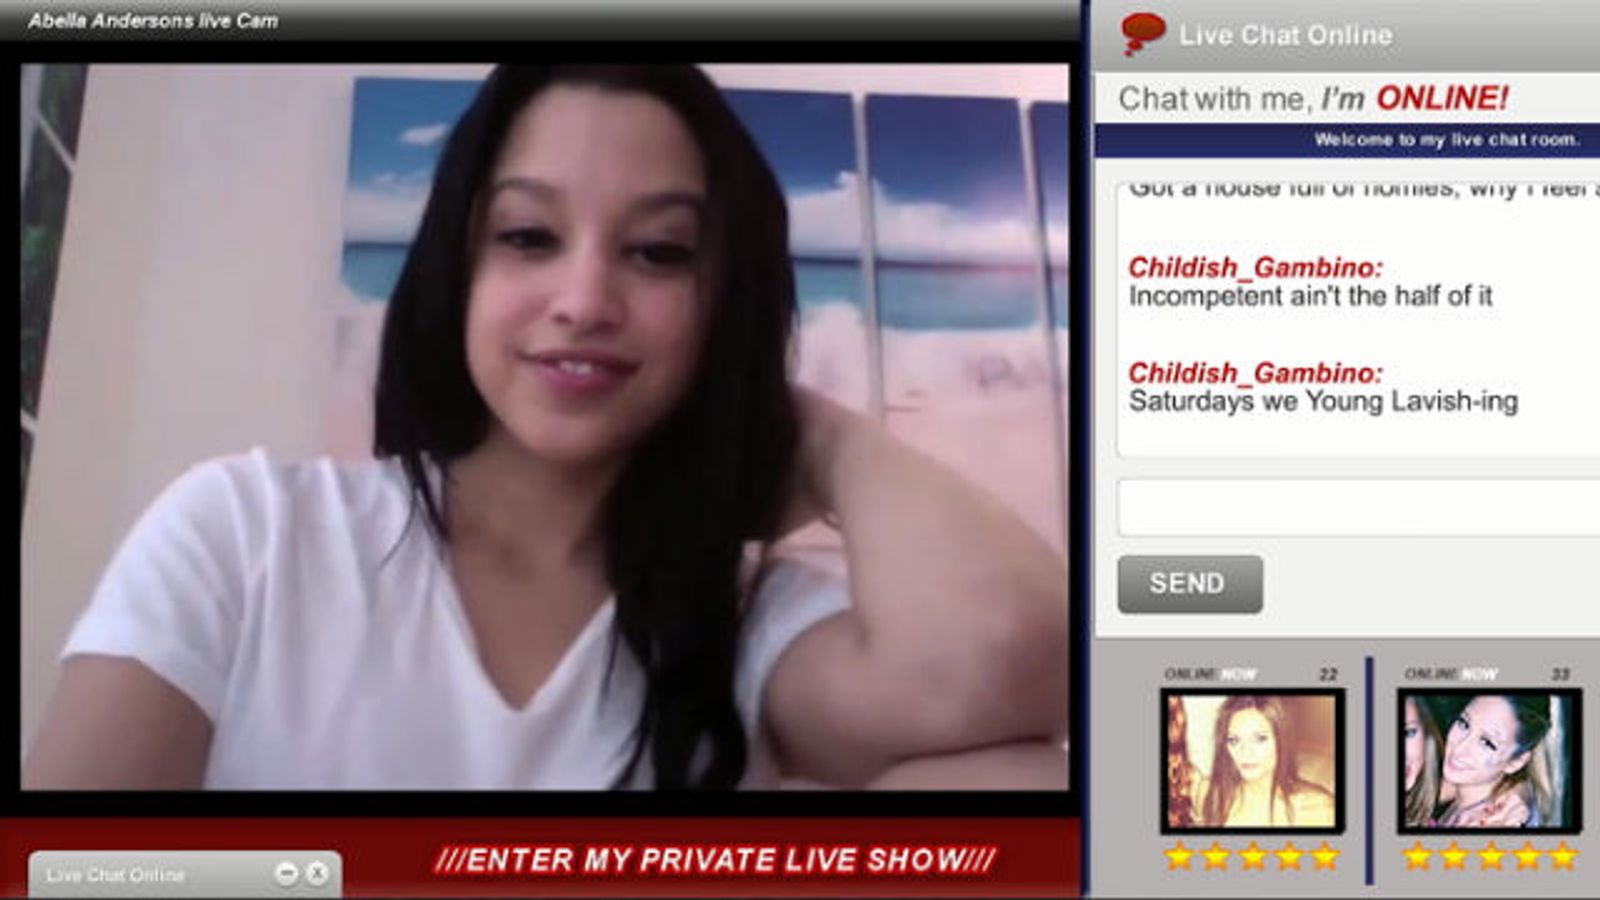 Childish Gambino Song Features Webcamming Abella Anderson